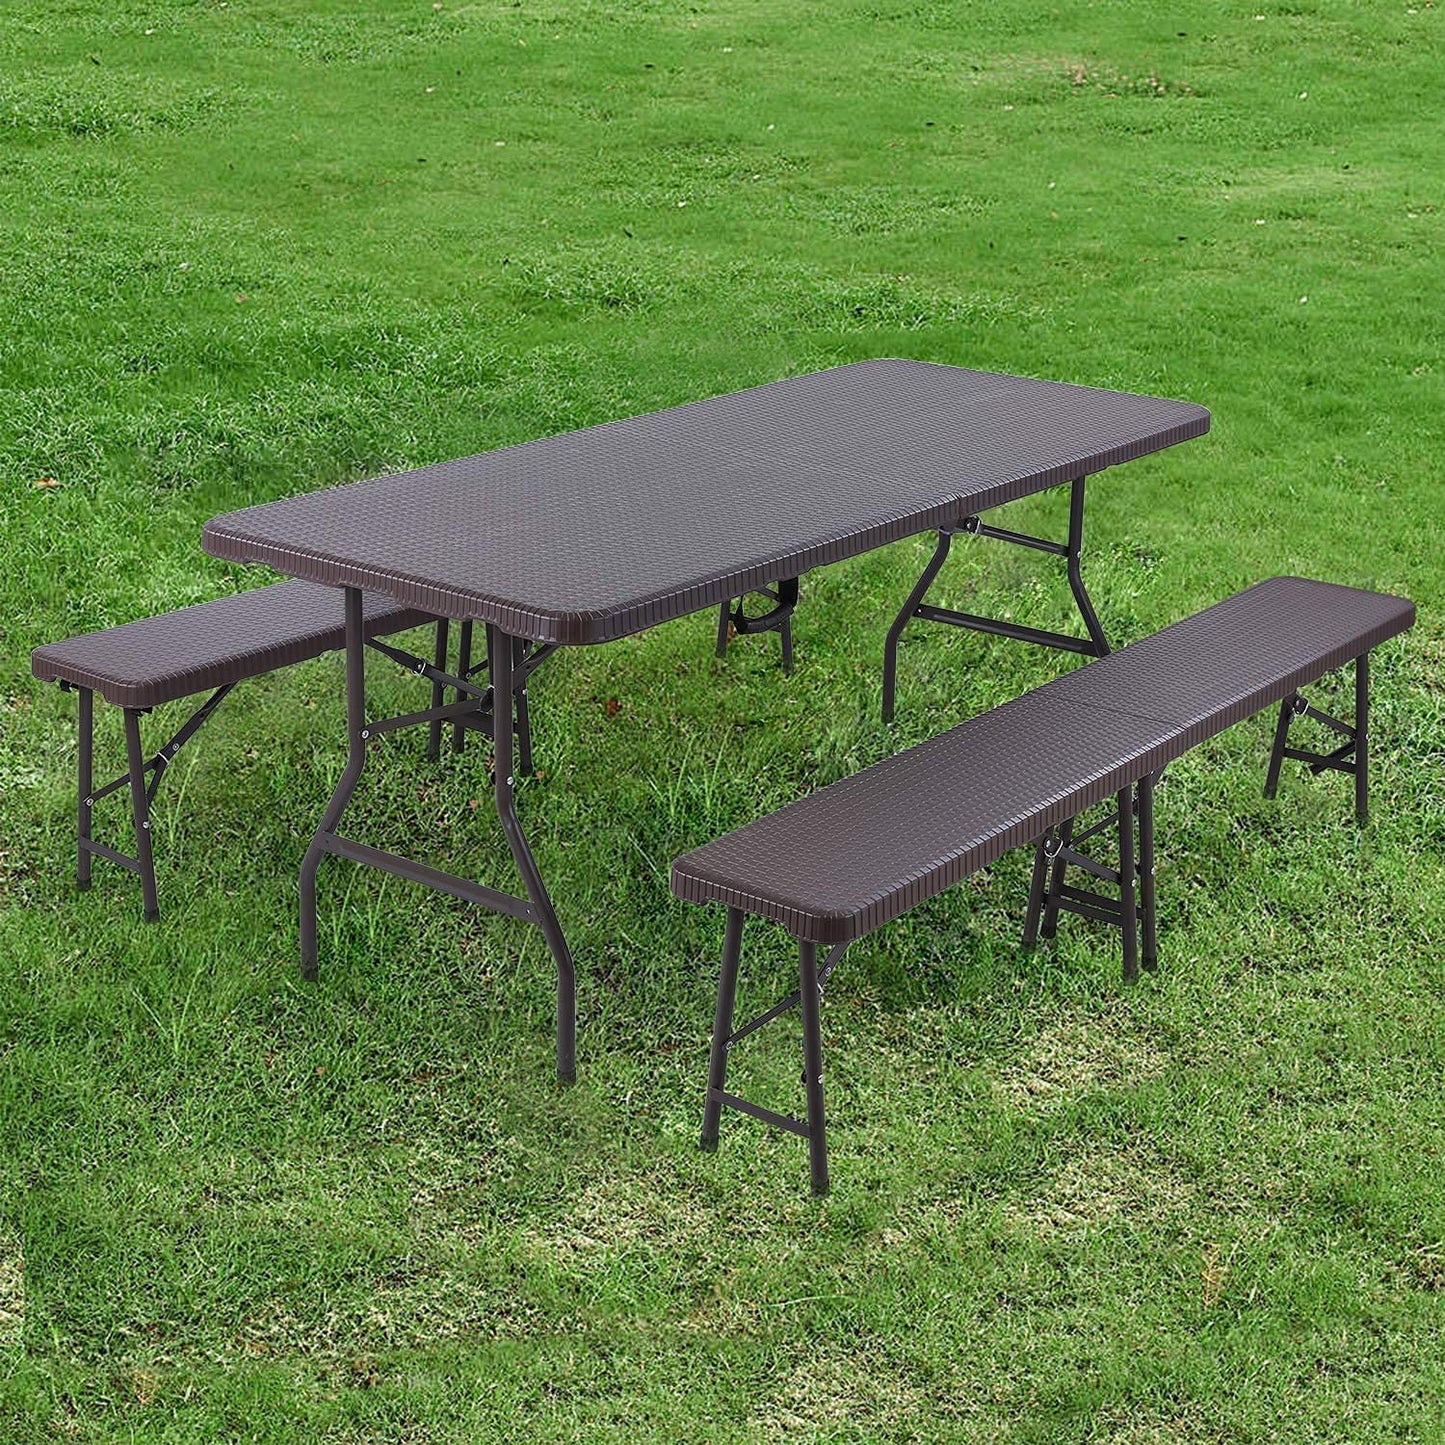 Grandiose Portable Folding Camping Table with Rattan Look